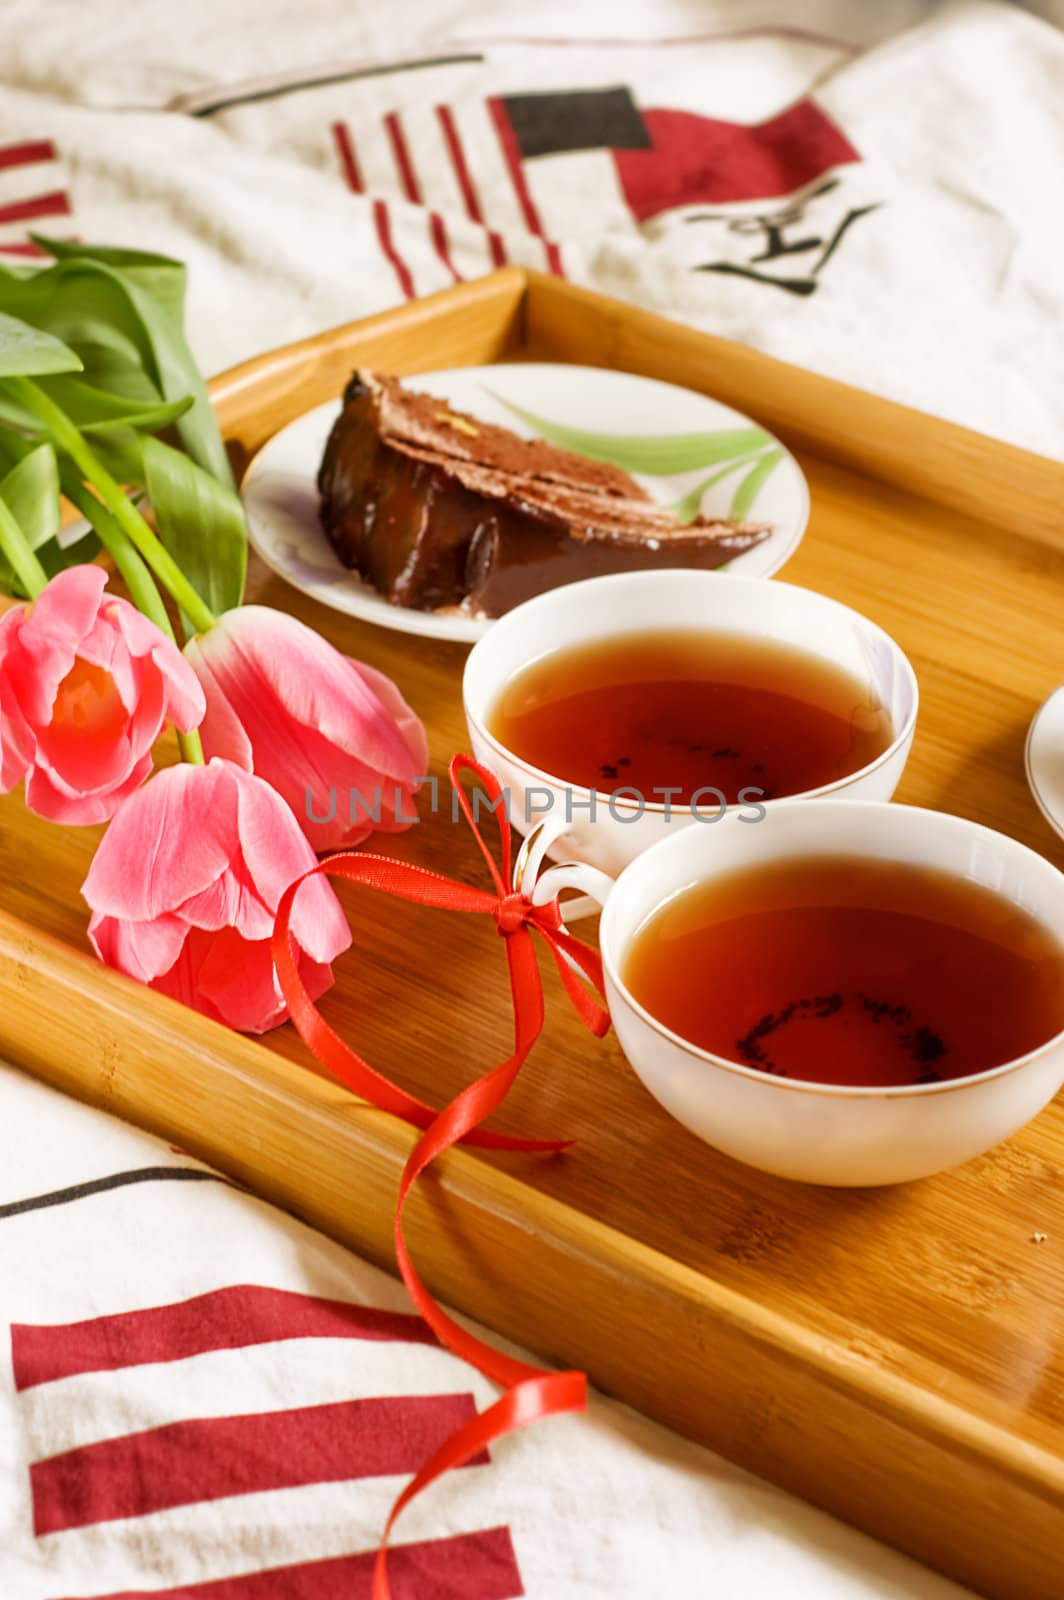 Breakfast tray on bed with tea, cakes and tulips